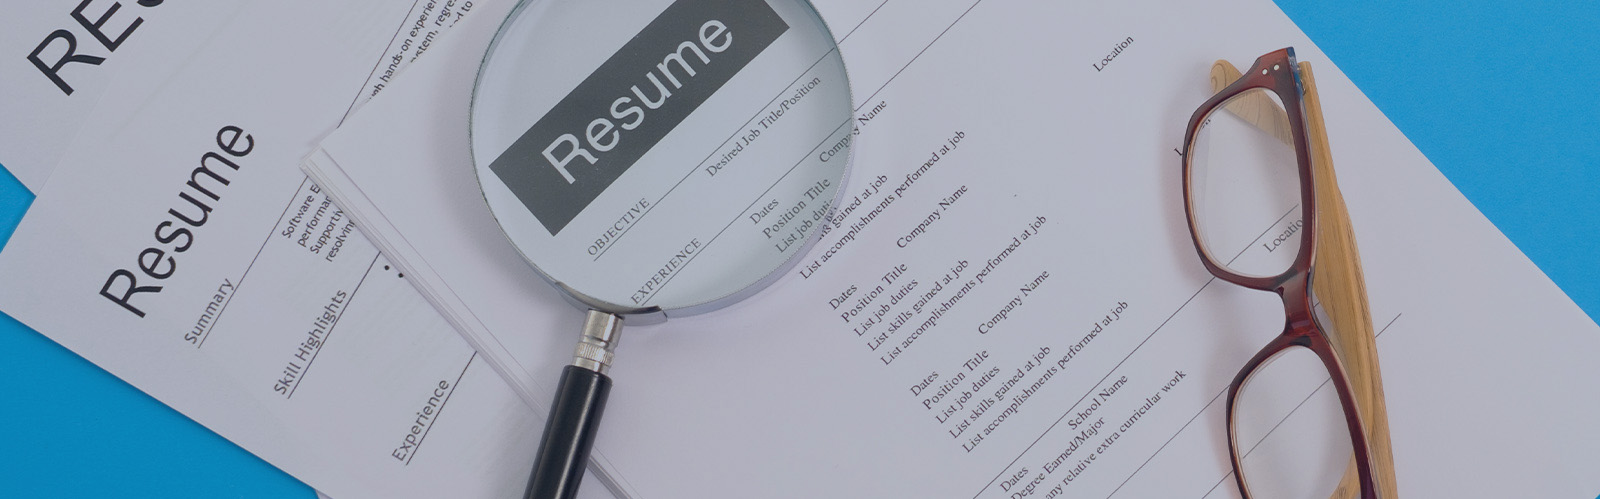 Job Hunting 101: Find Your Perfect Job